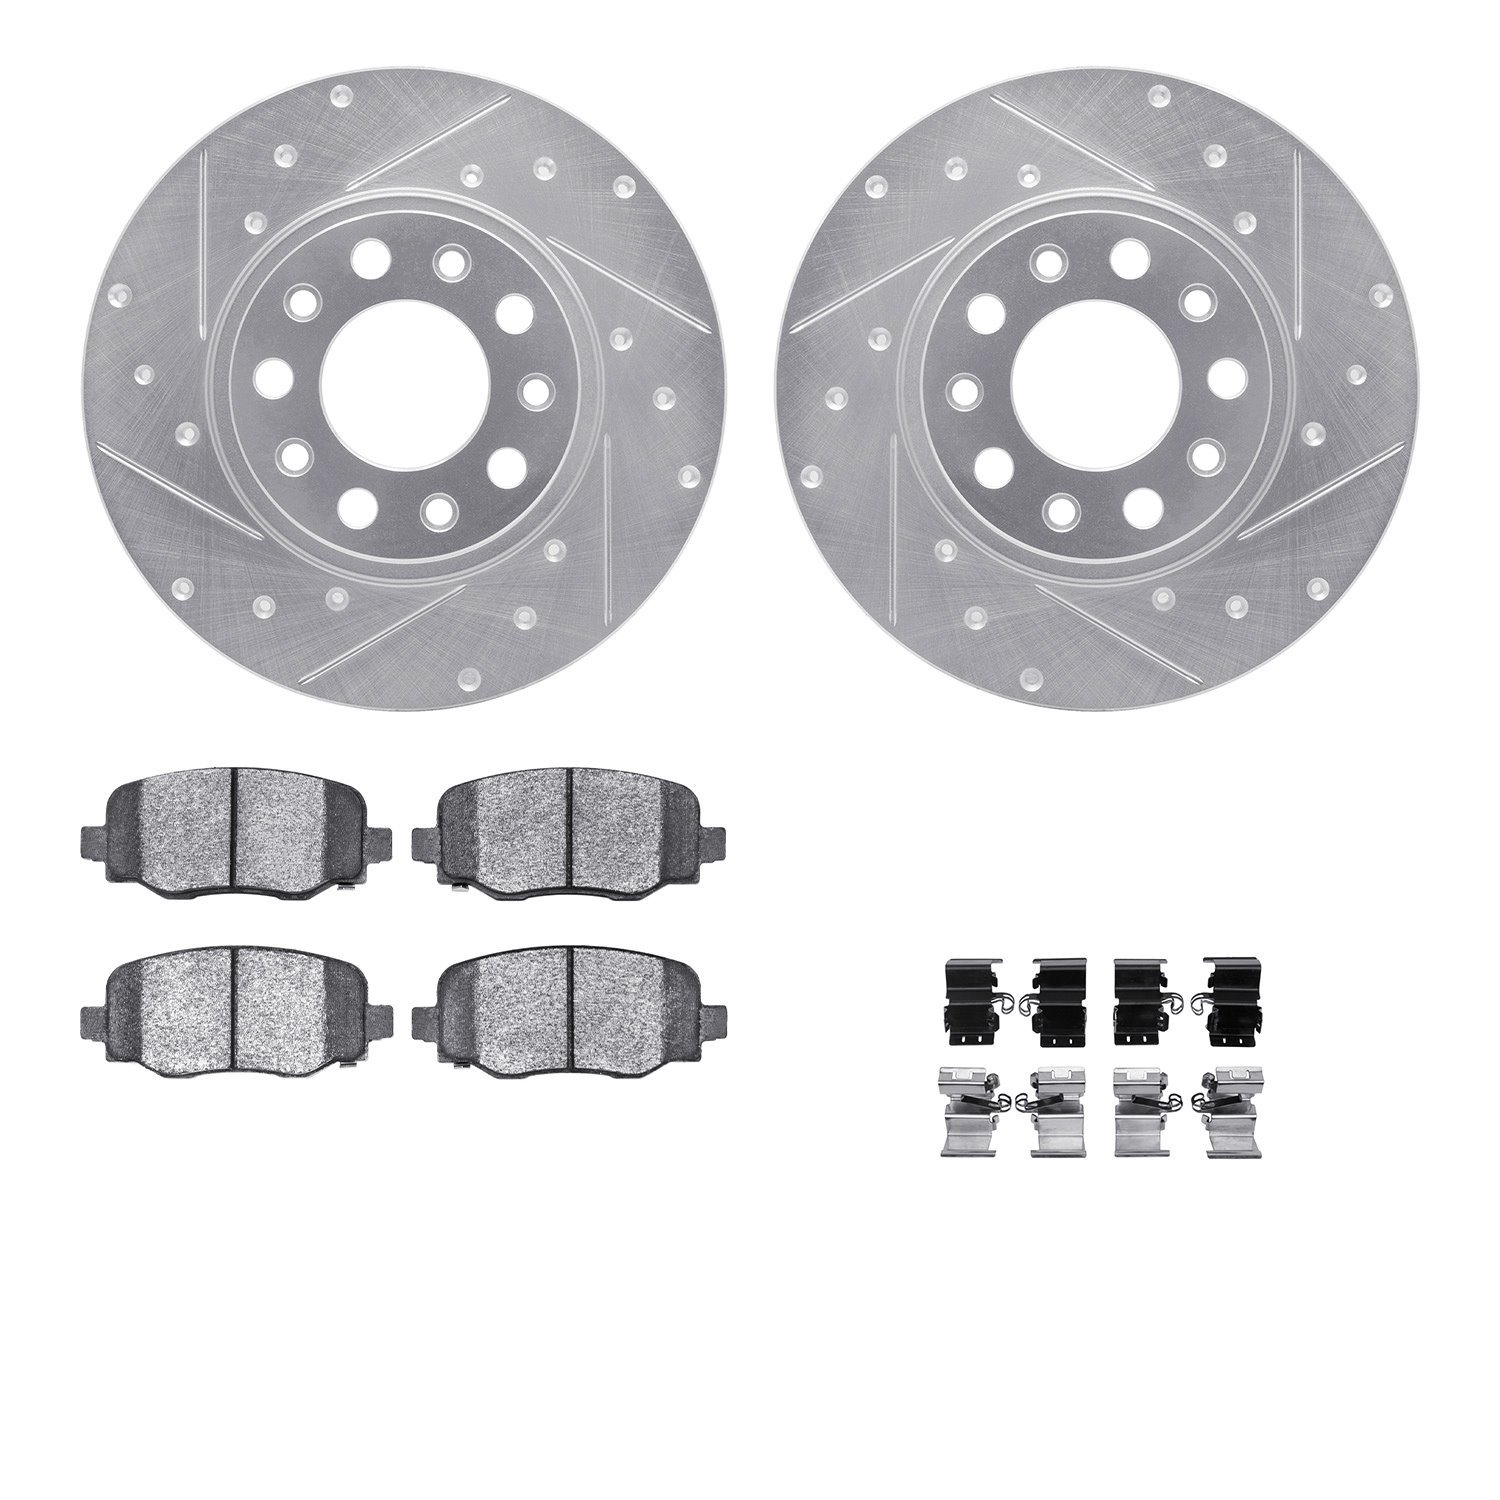 7412-42014 Drilled/Slotted Brake Rotors with Ultimate-Duty Brake Pads Kit & Hardware [Silver], Fits Select Mopar, Position: Rear